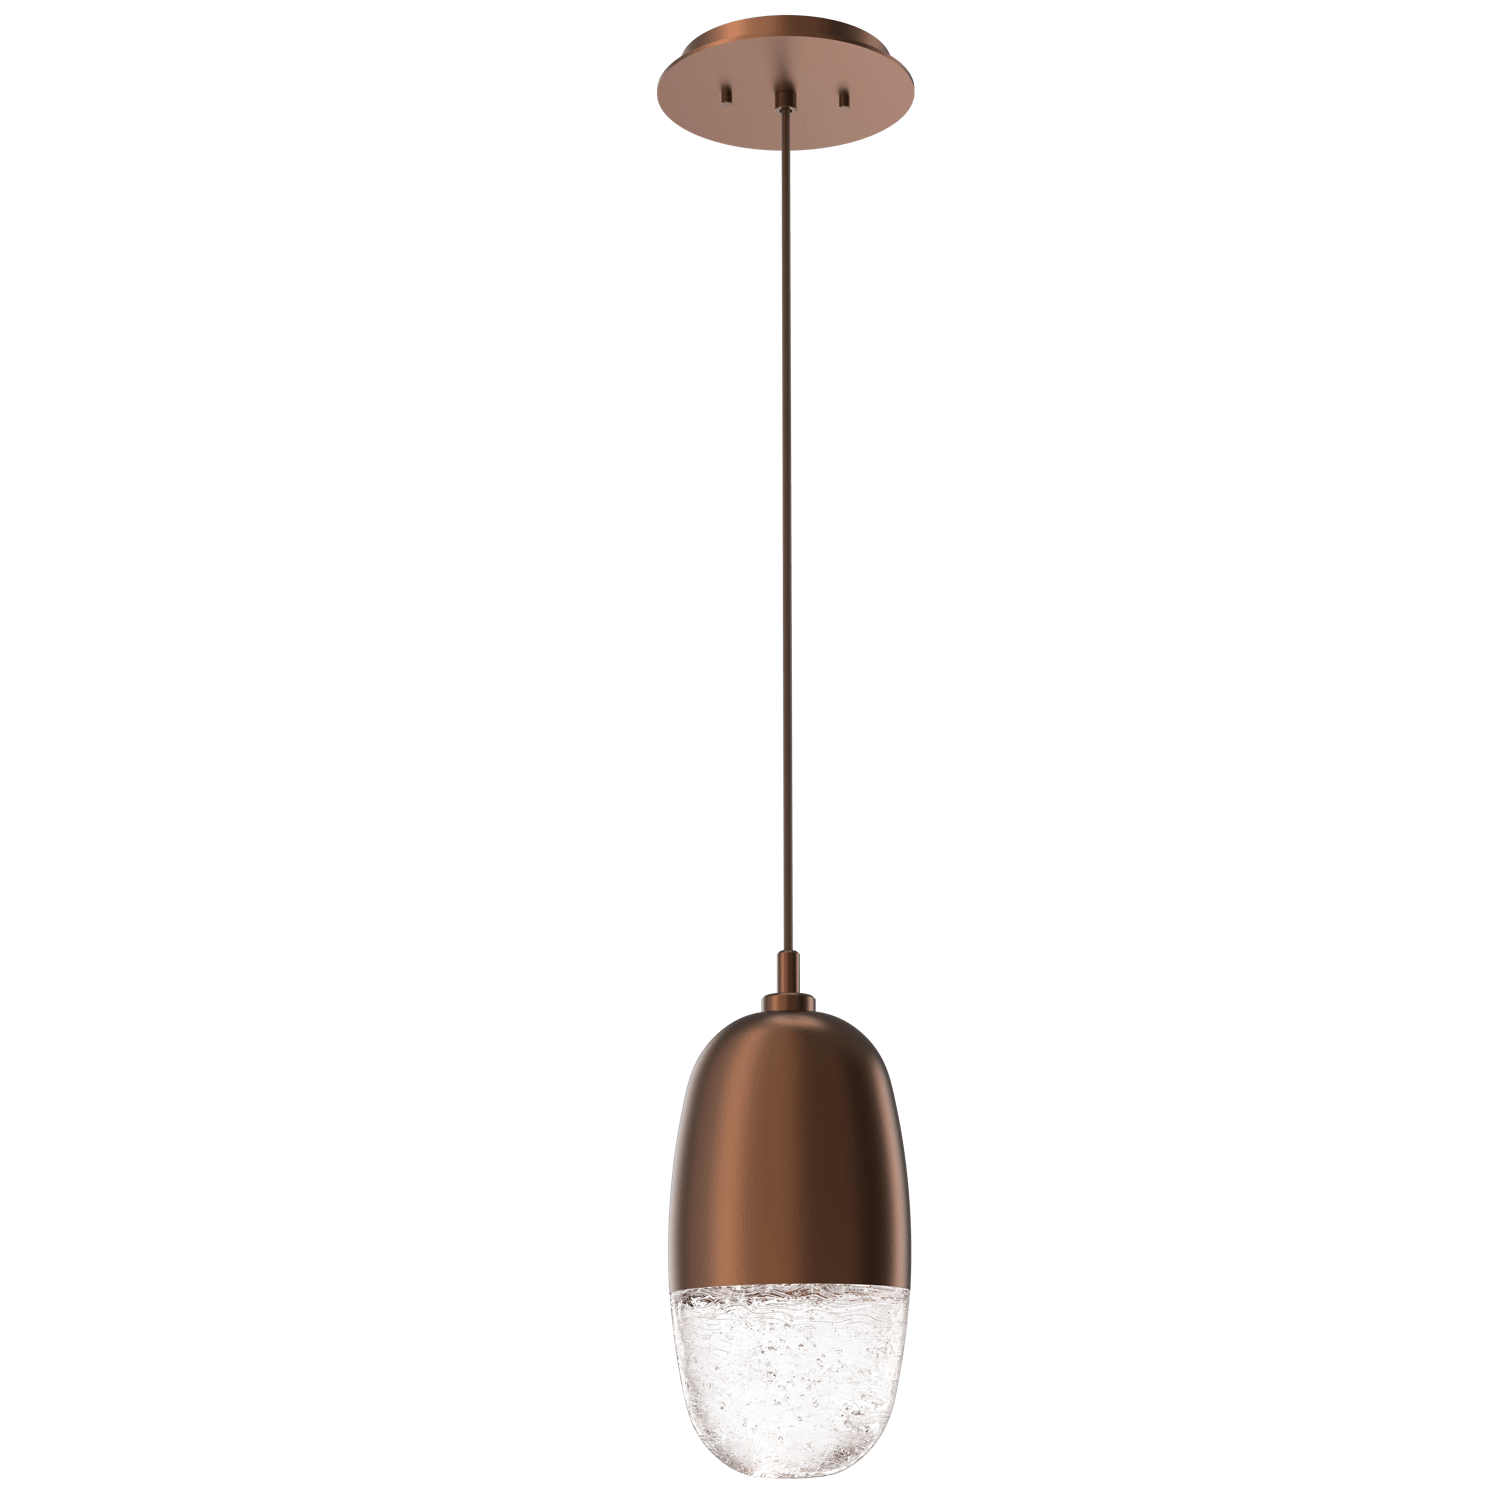 LAB0079-01-BB-Hammerton-Studio-Pebble-pendant-light-with-burnished-bronze-finish-and-clear-cast-glass-shades-and-LED-lamping